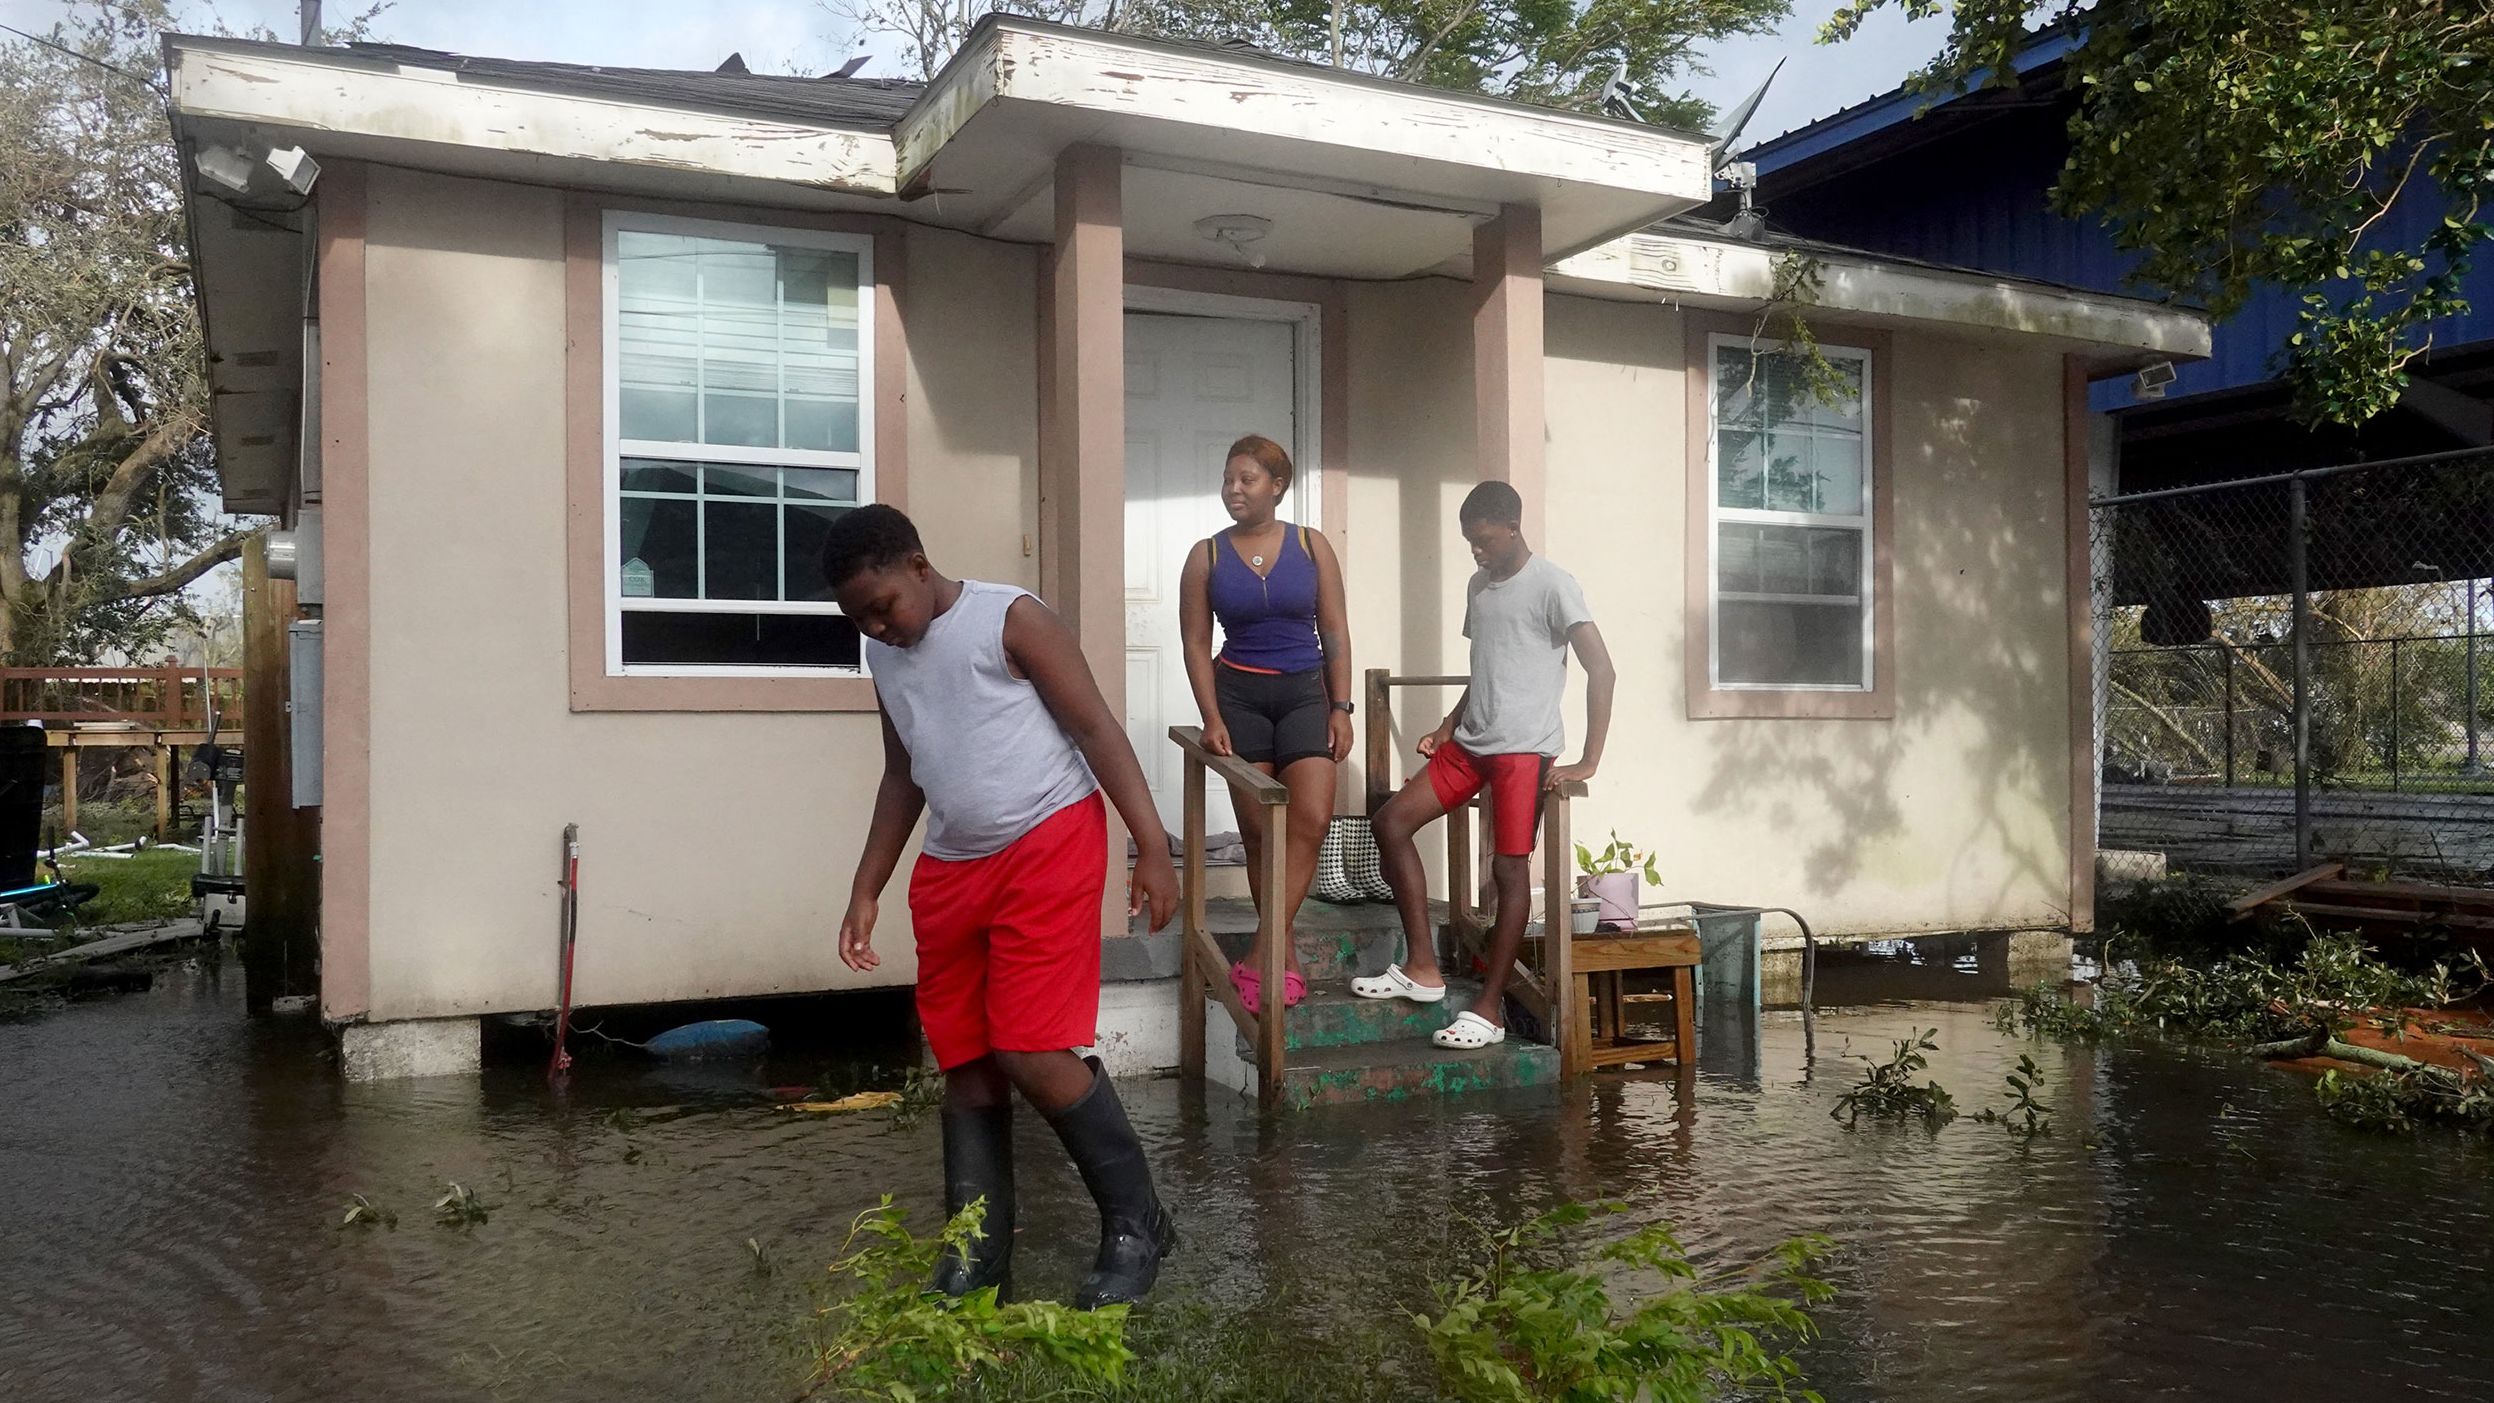 Michelle Washington and her sons Kendrick and Kayden check out damage to their home caused by Hurricane Ida on August 30 in New Orleans.